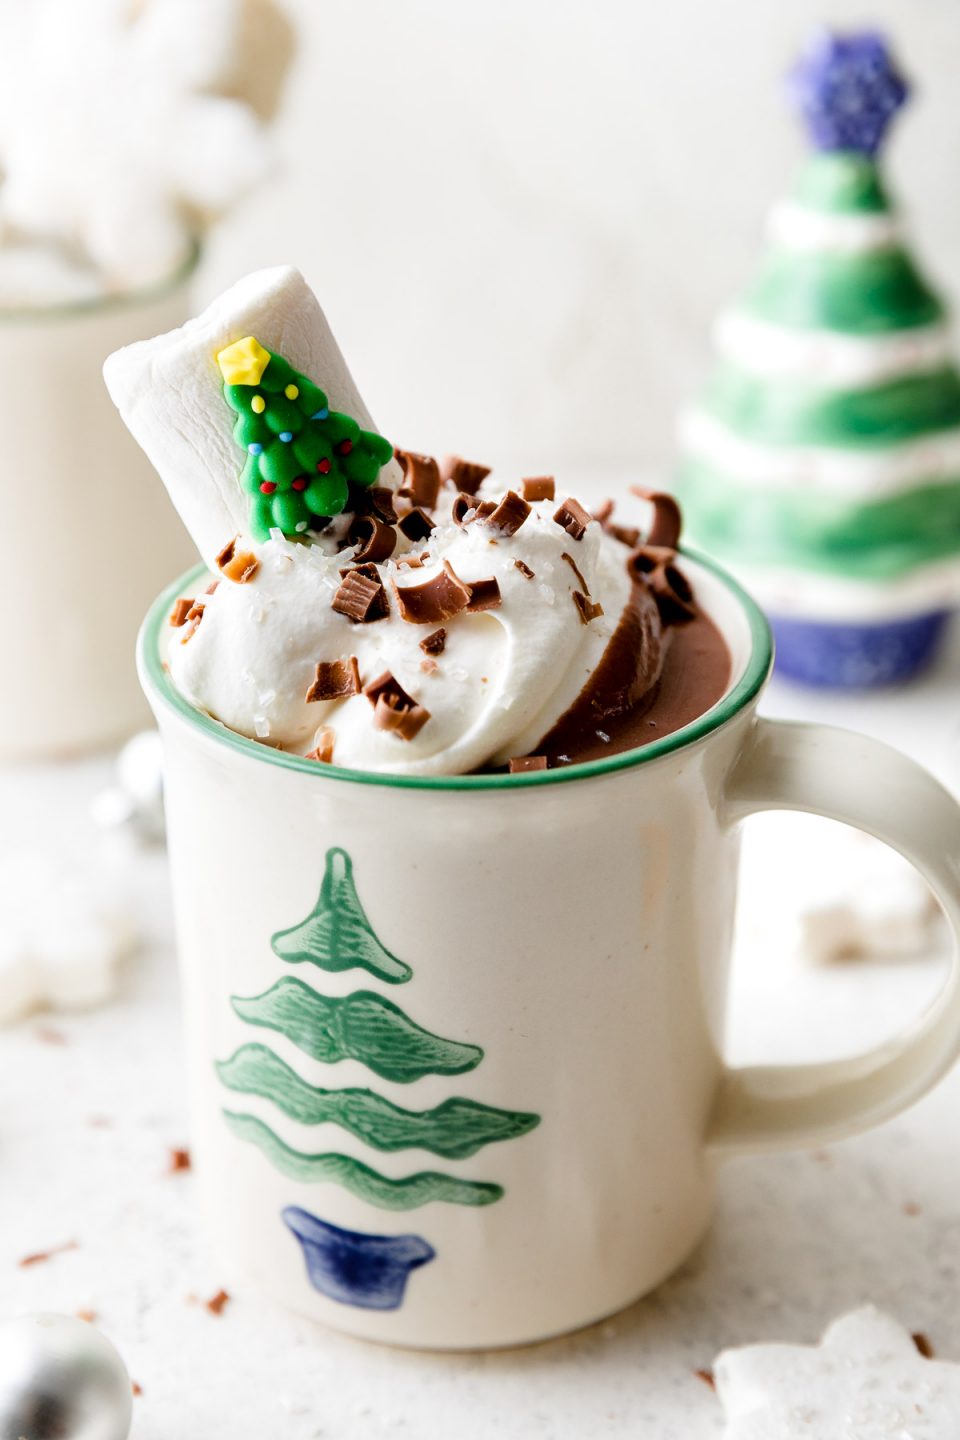 A white mug decorated with a Christmas tree is filled with Christmas Hot Chocolate, topped with whipped cream, & garnished with chocolate shavings & a Christmas tree marshmallow. The mug sits atop a white surface alongside marshmallows, ornaments, & small Christmas decorations.